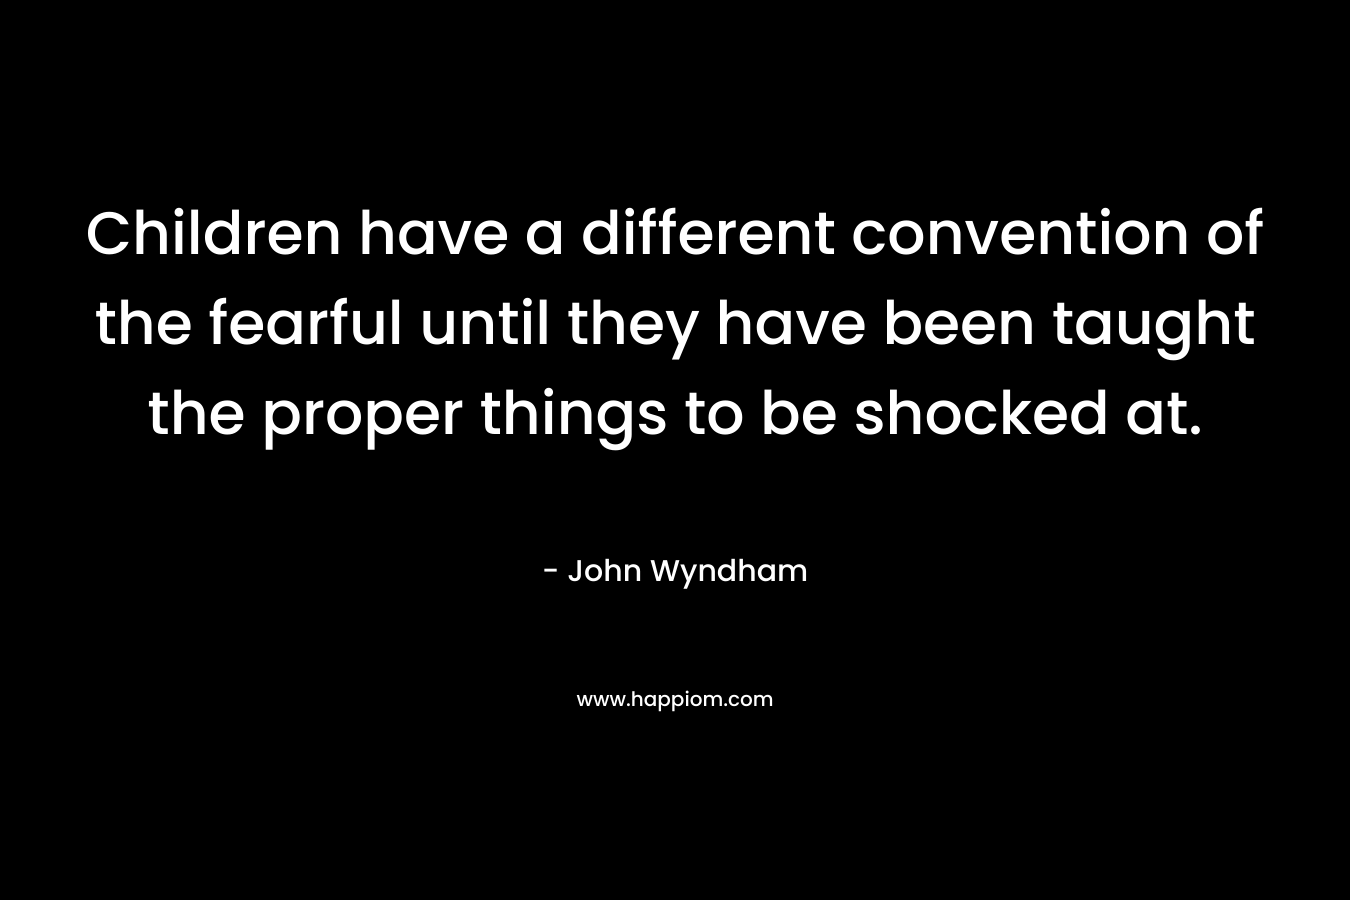 Children have a different convention of the fearful until they have been taught the proper things to be shocked at.